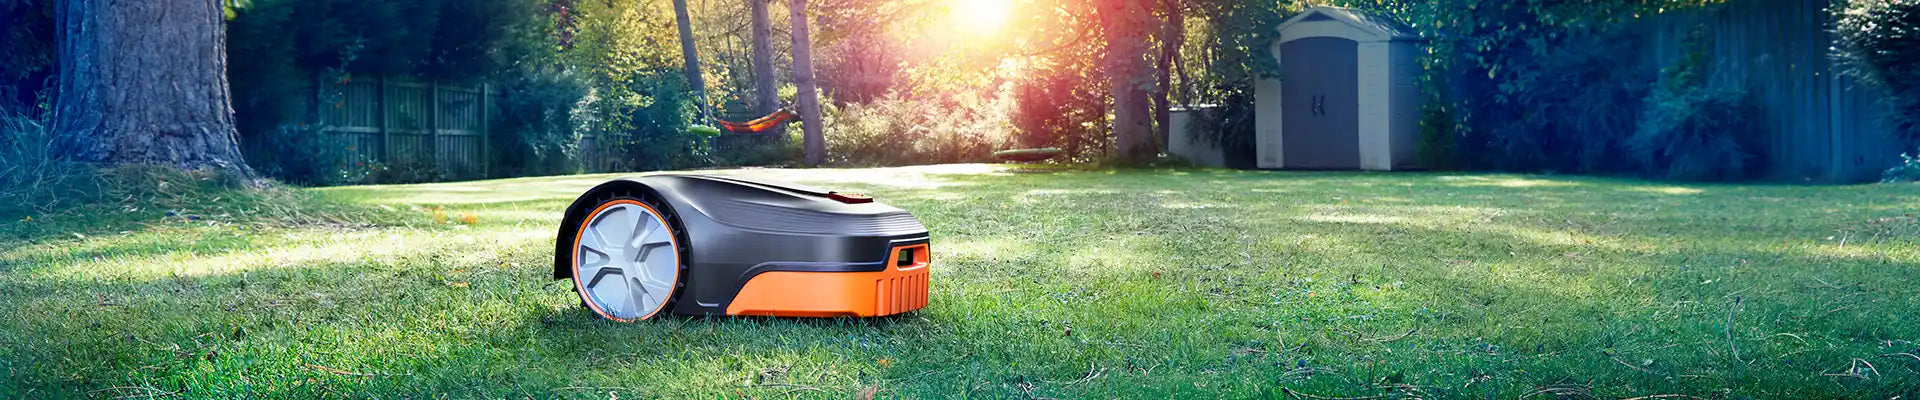 LawnMaster L10 Robot Lawn Mower on large lawn in UK